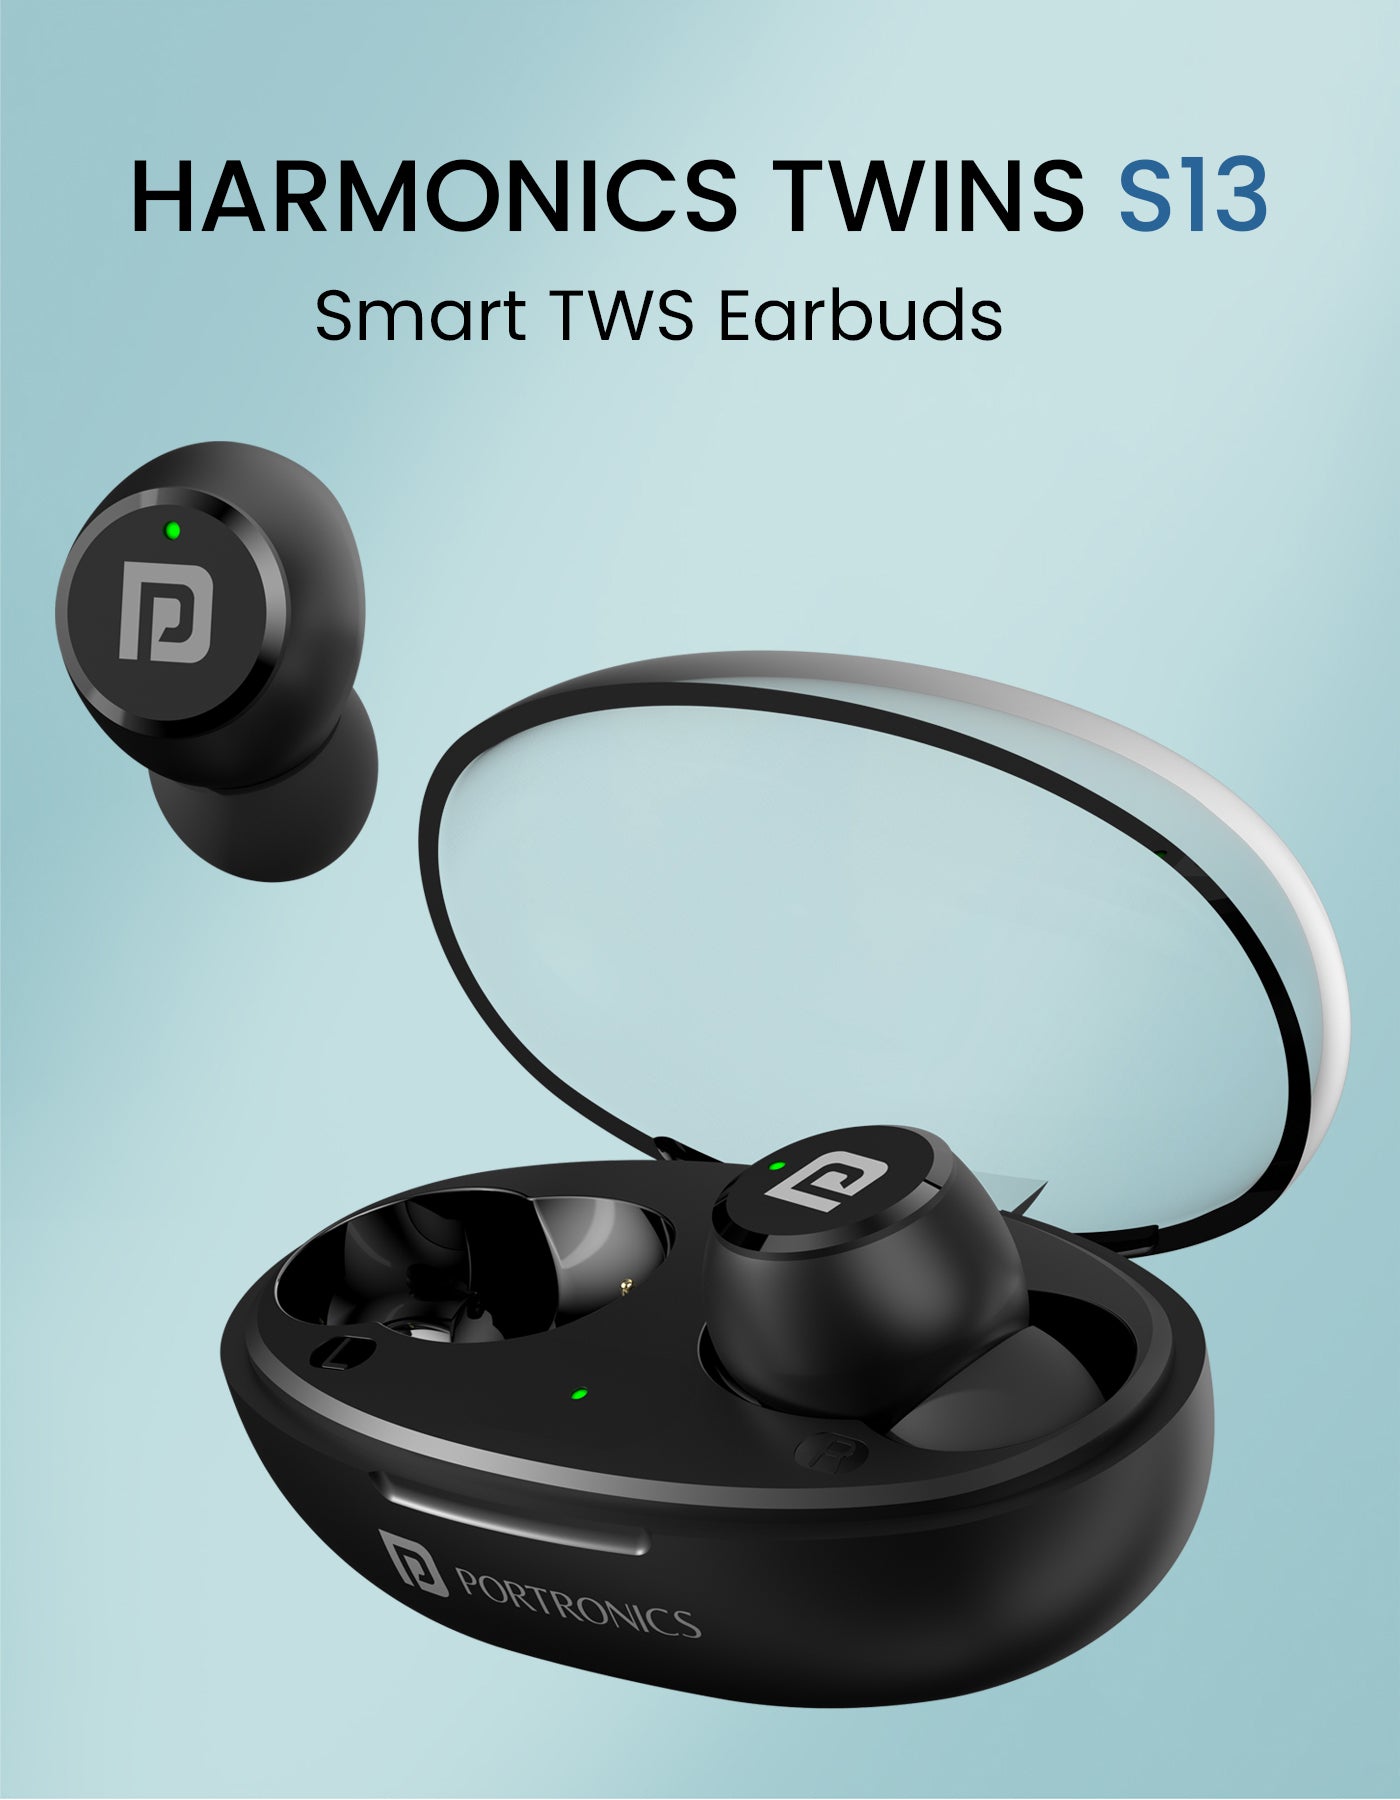 Portronics Harmonics Twins s13 tws bluetooth earbuds| earbuds with 24hr playtime| best earbuds for working professionals